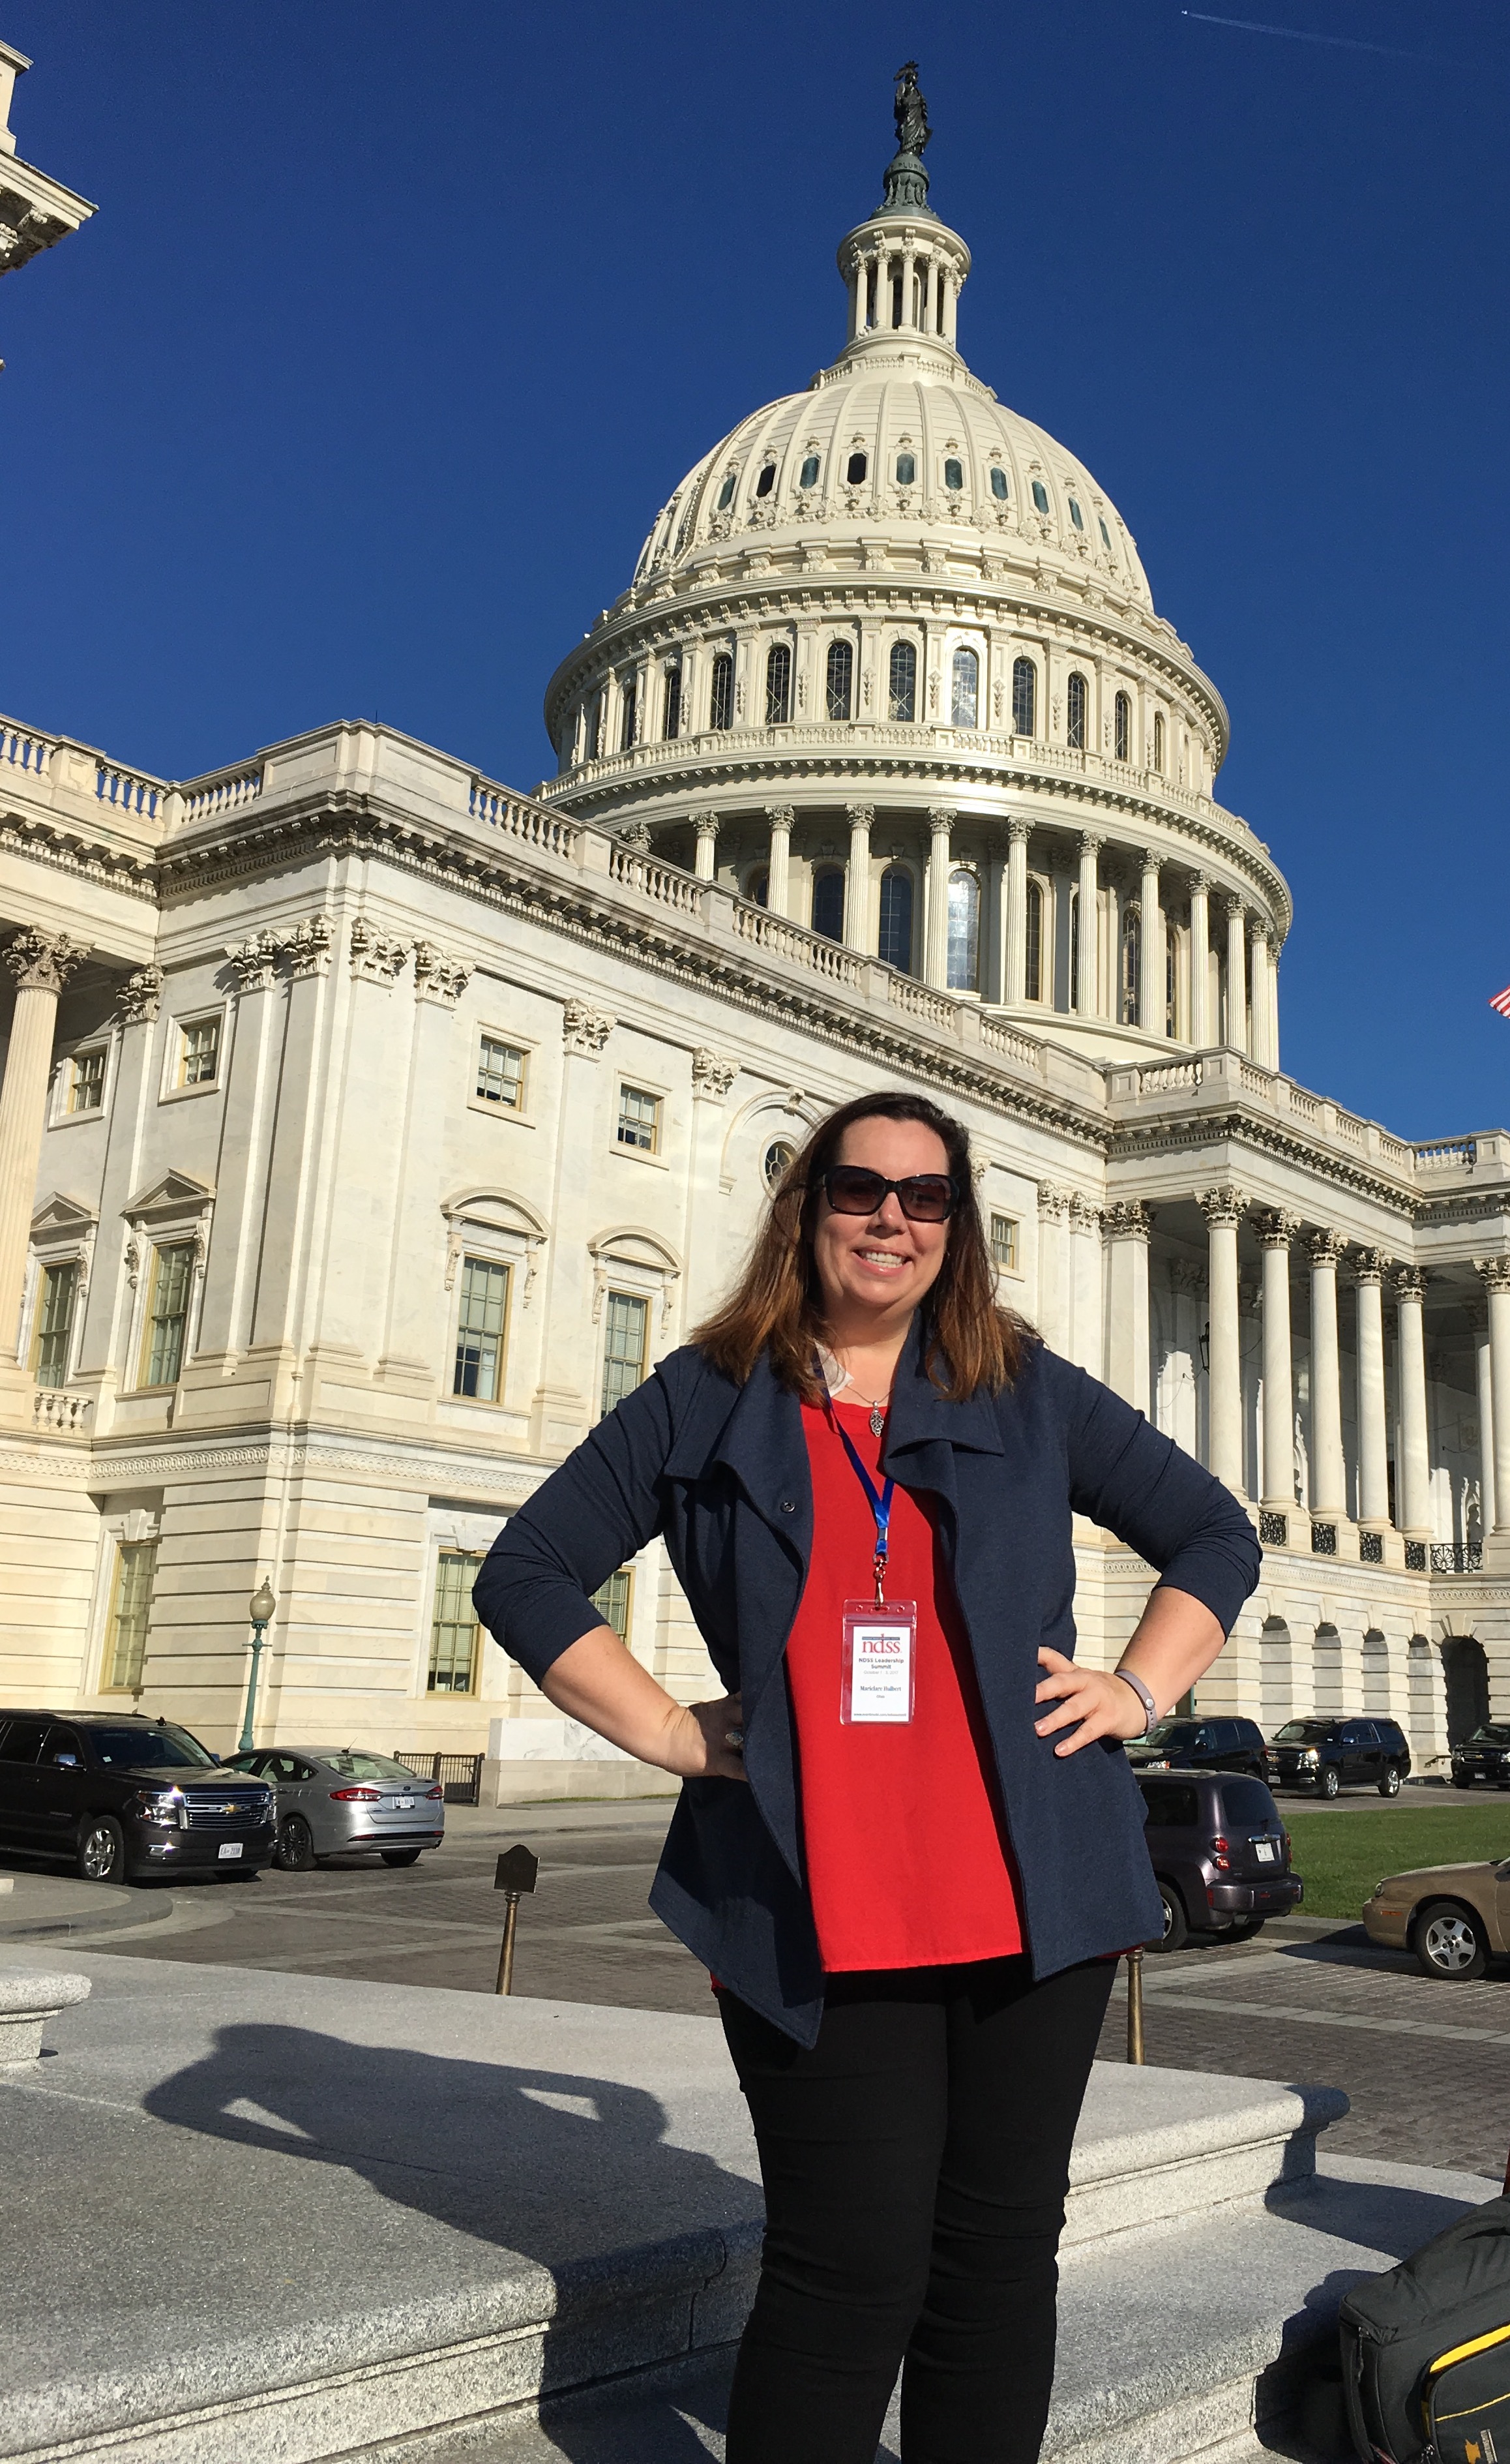 Alt Text: A white woman stands proudly in front of a large white ornate building on Capitol Hill. She wears a red shirt,  blue blazer and sunglasses. She smiles. A visitor pass hangs at her neck